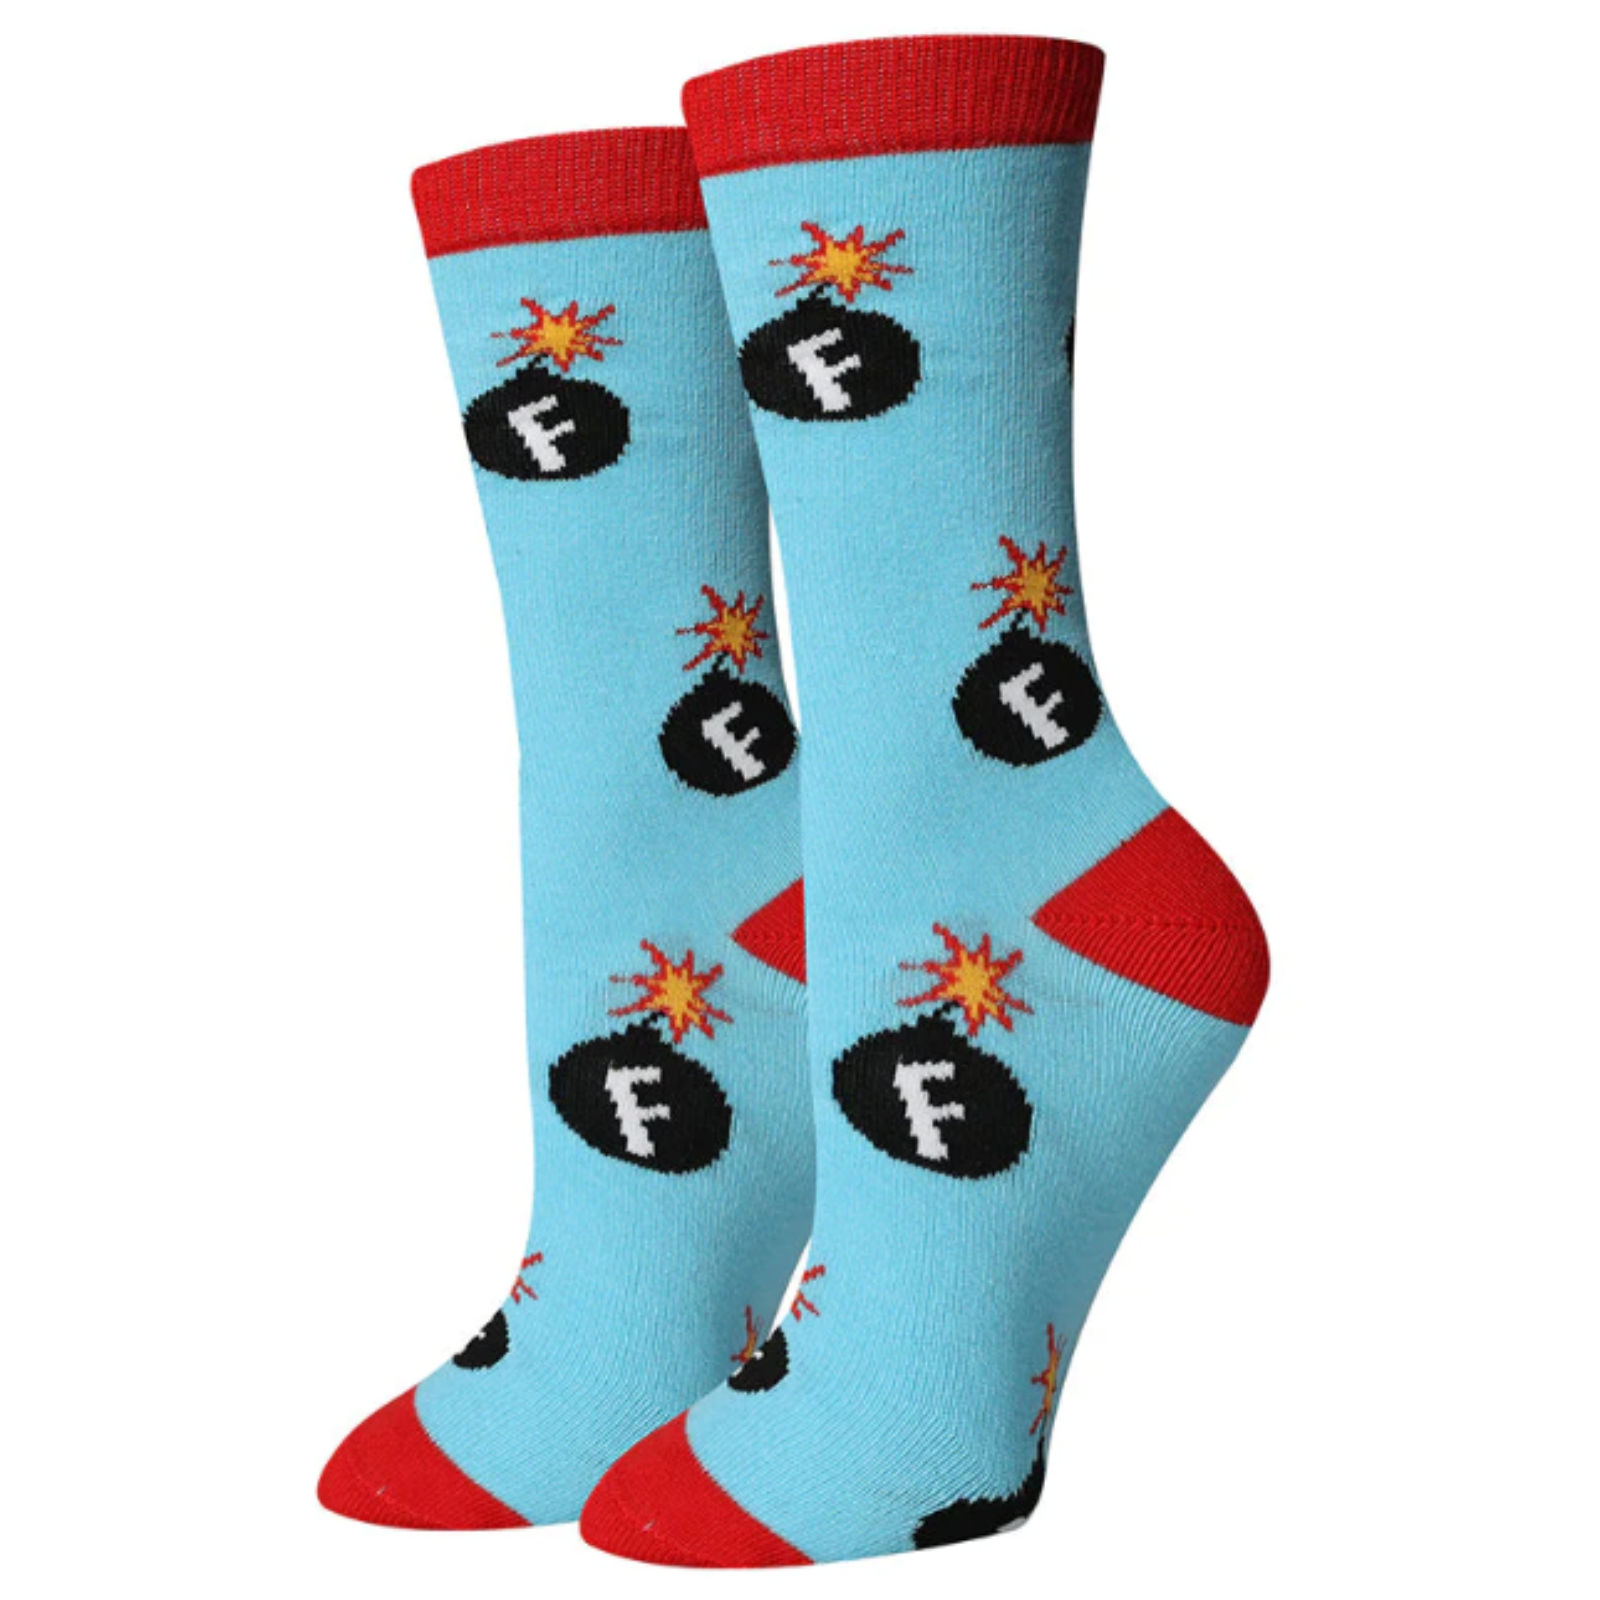 Sock Harbor F Bomb women's and men's sock featuring light blue sock with red cuff, toe, and heel and black bombs with F on it on display feet